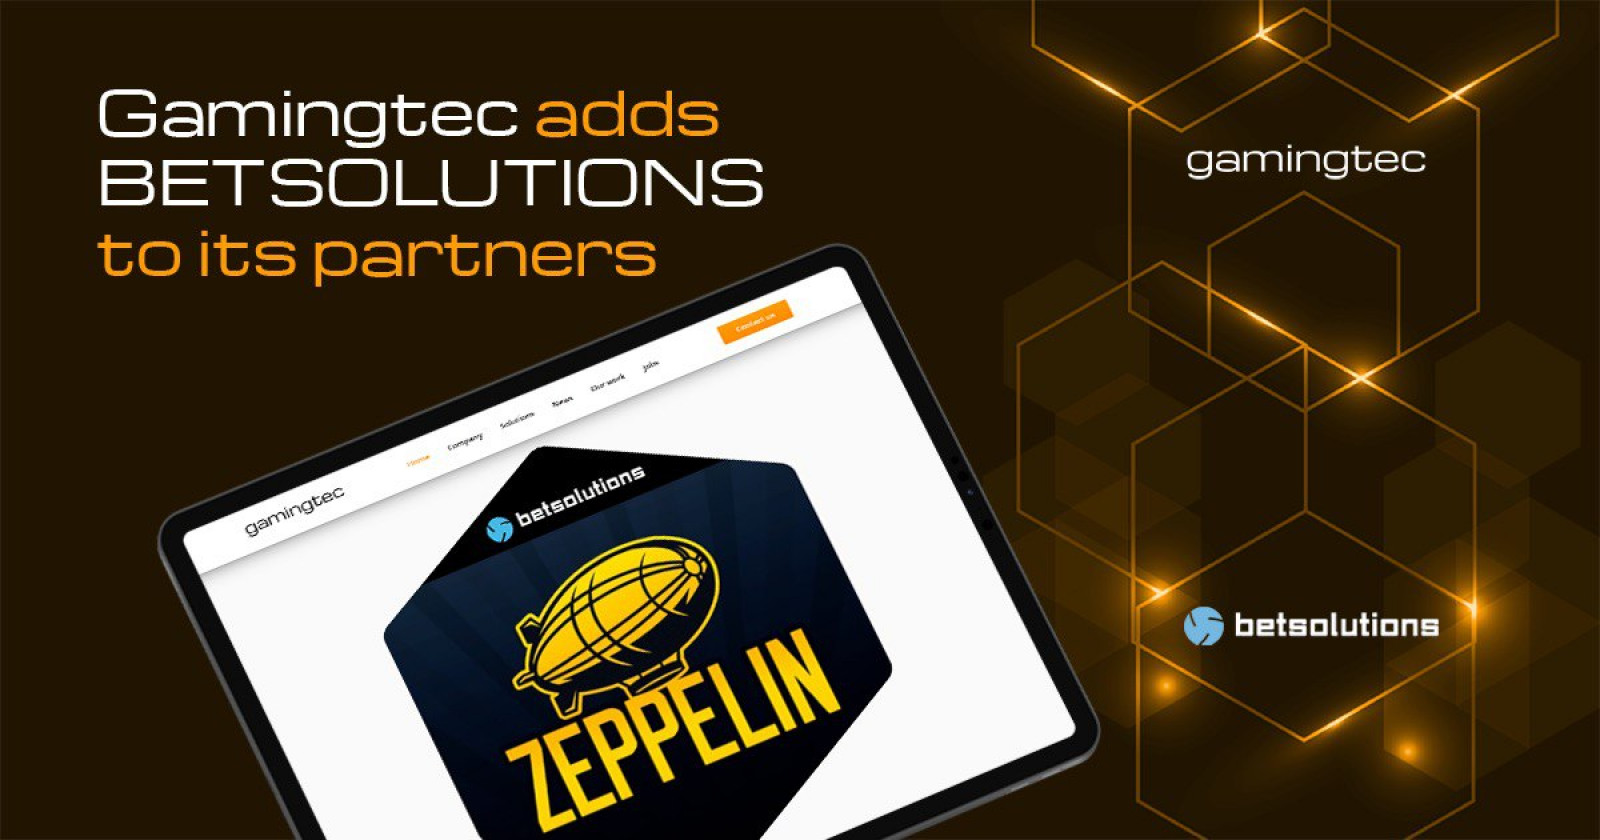 Gamingtec strikes deal with BetSolutions to launch cult “crash” game “zeppelin”